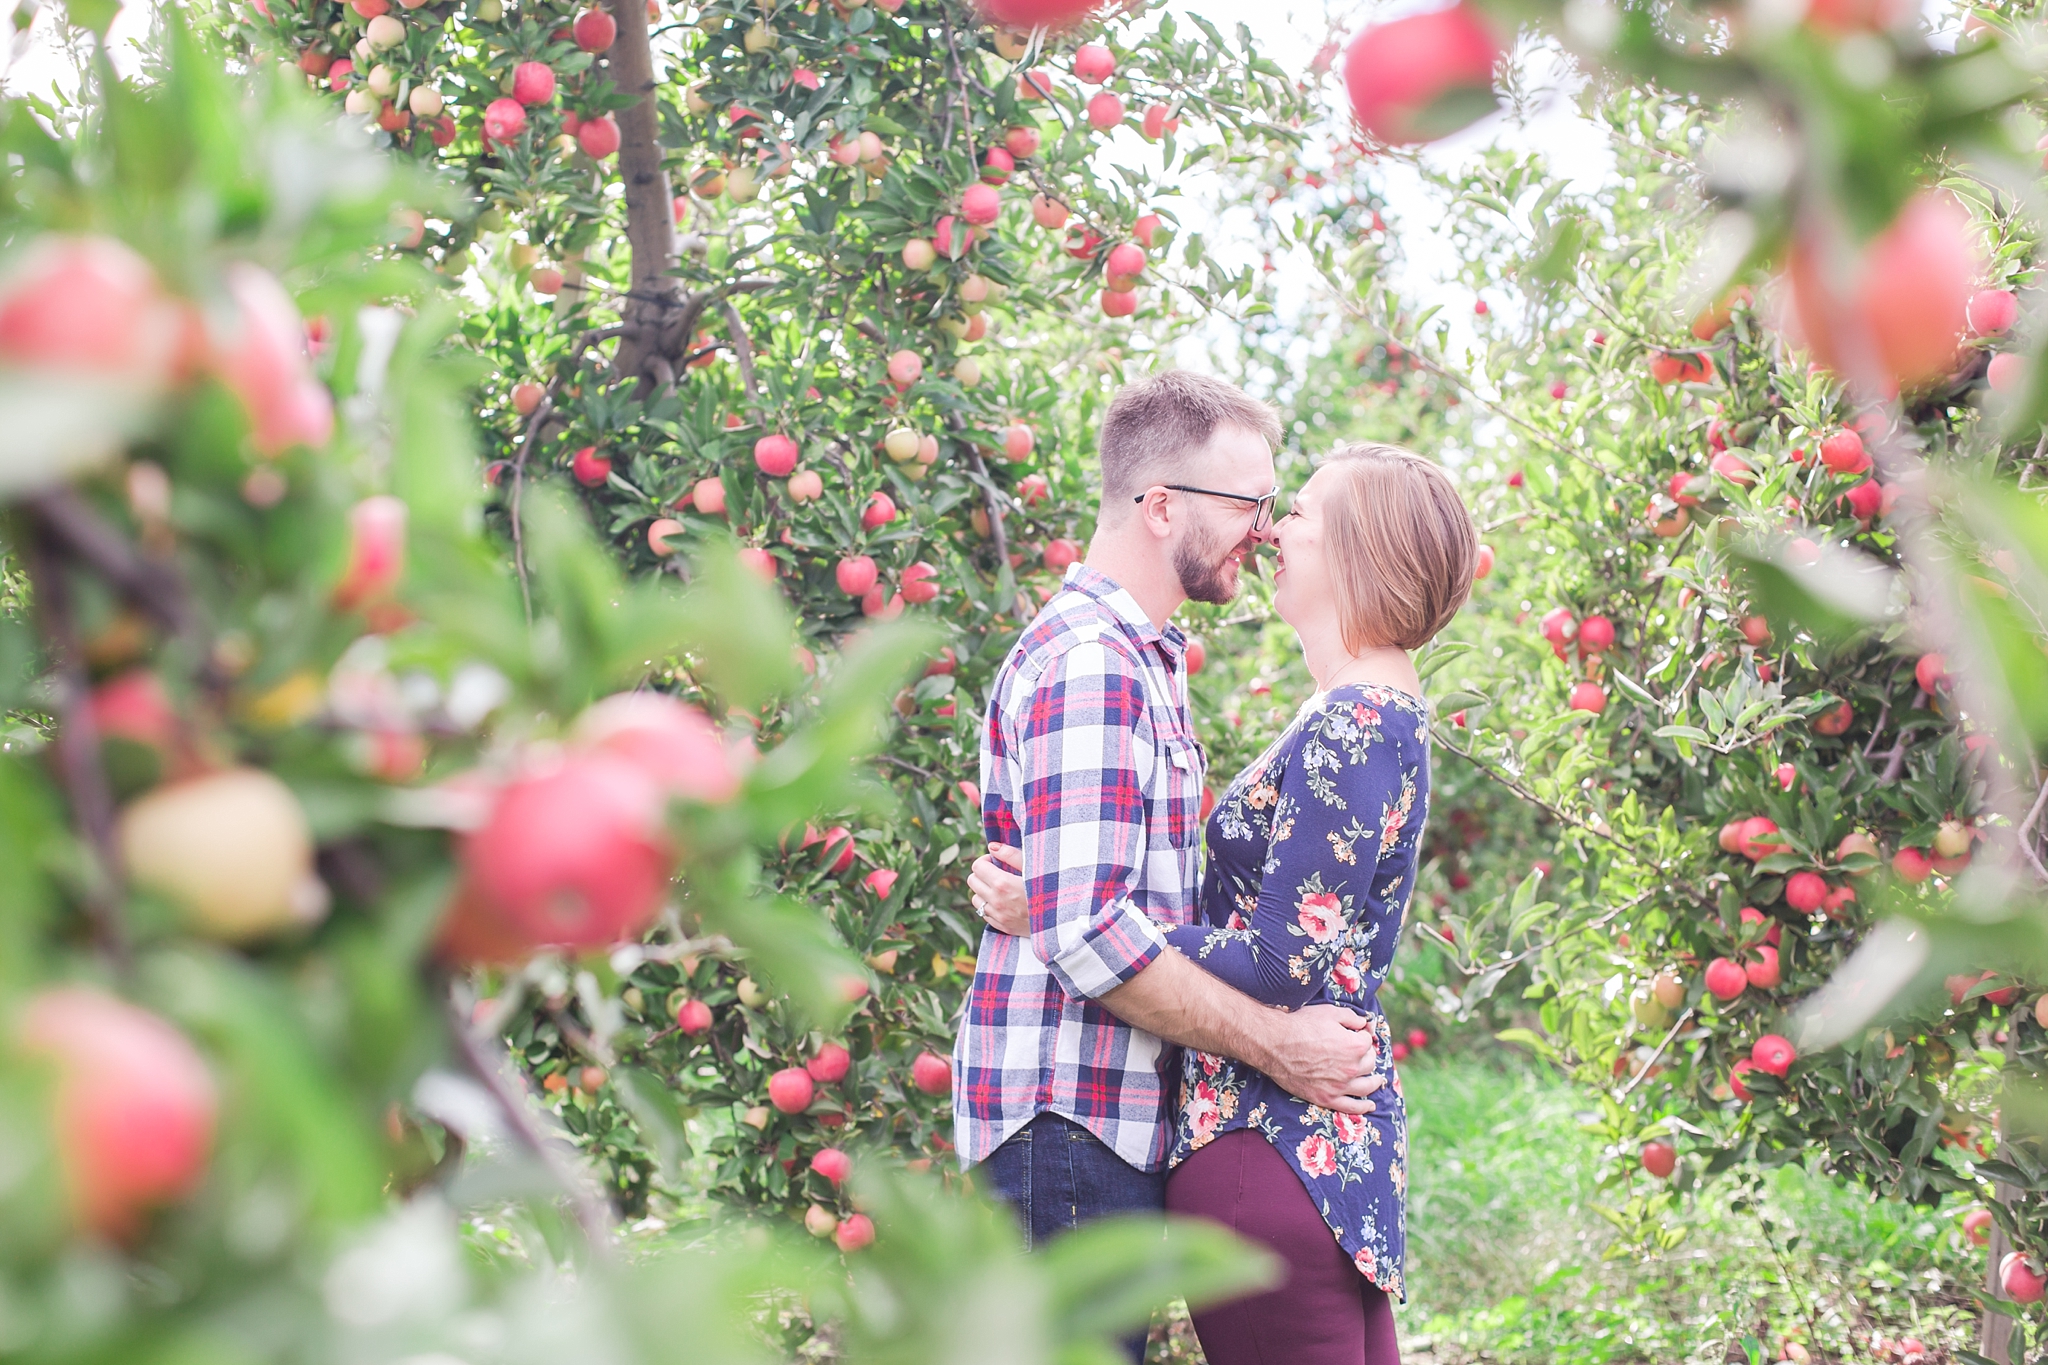 playful-fall-engagement-photos-at-hy's-cider-mill-ochard-in-bruce-township-michigan-by-courtney-carolyn-photography_0018.jpg